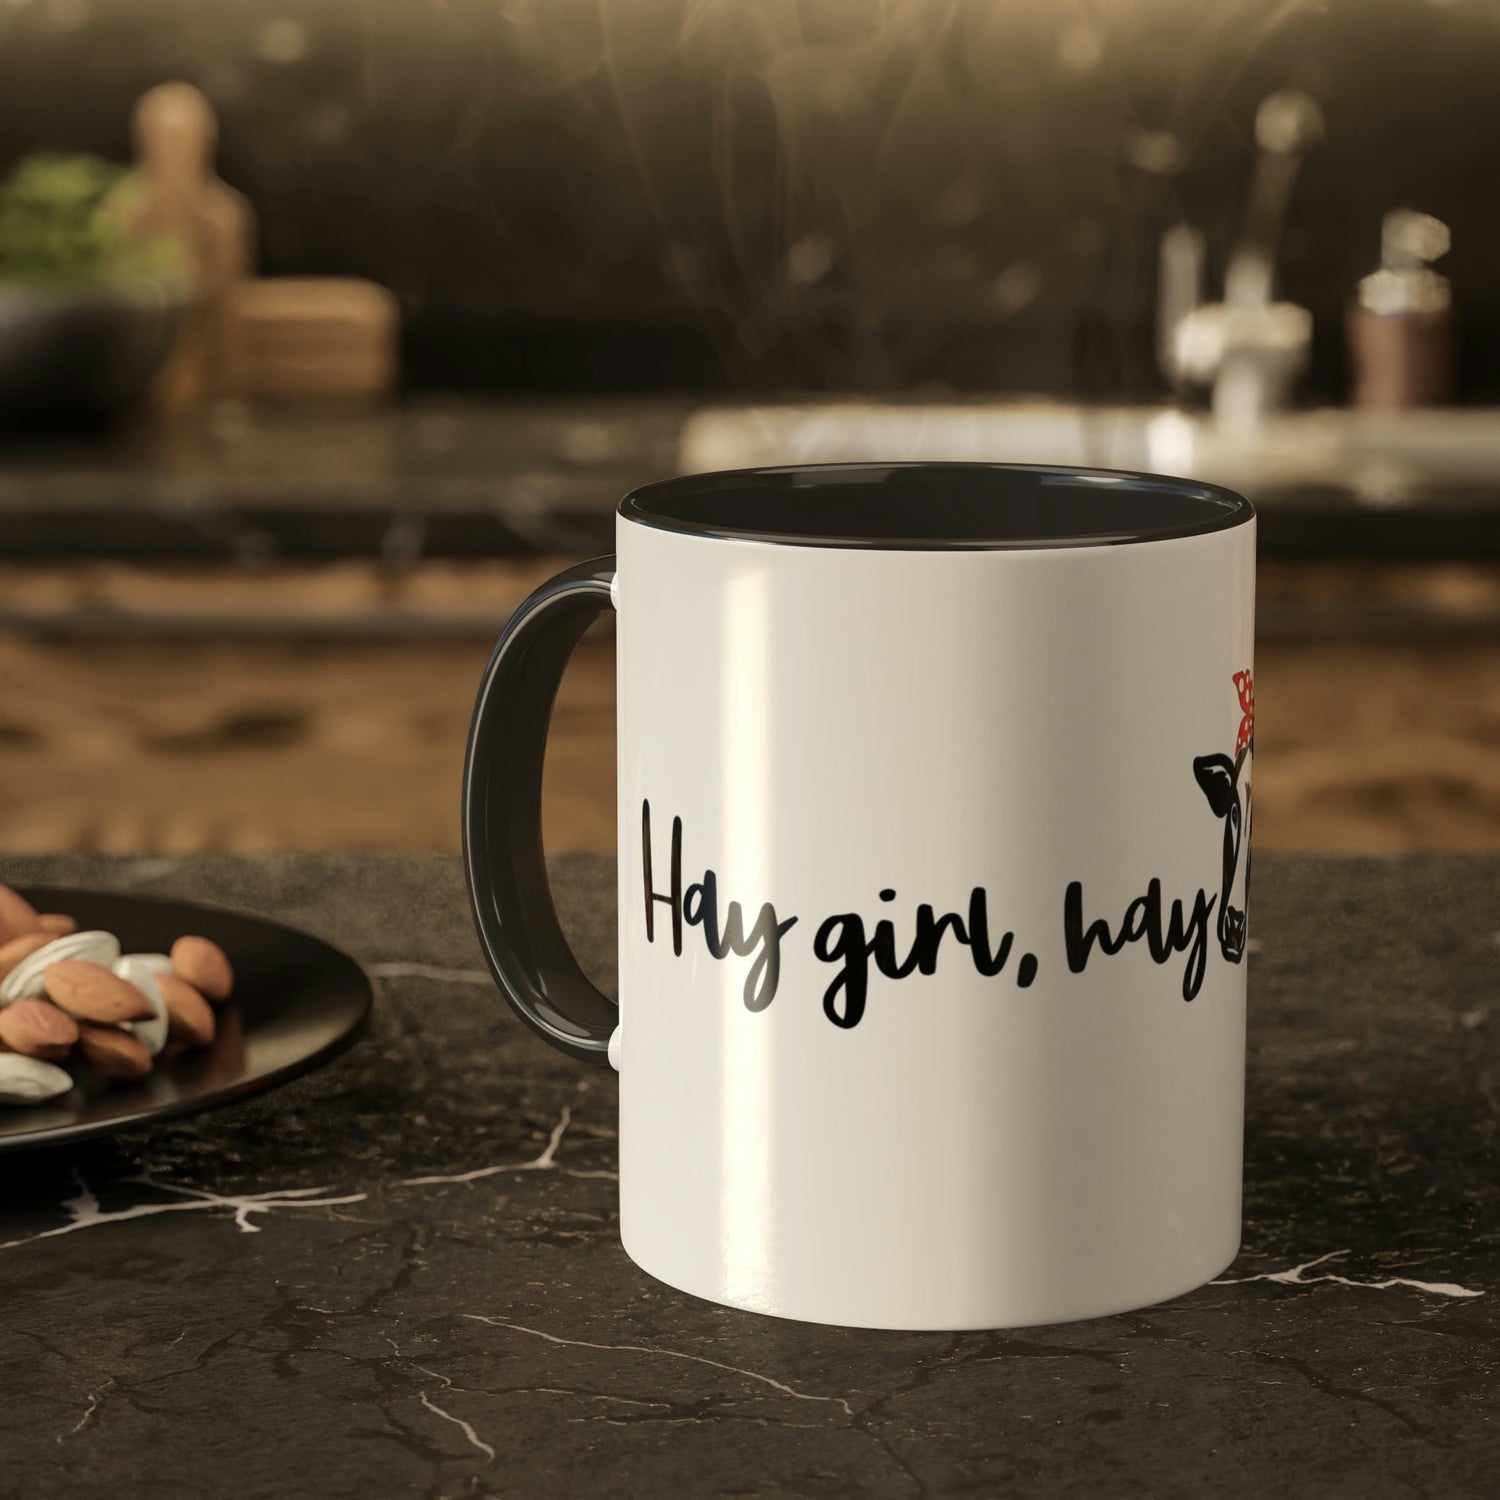 hay-girl-hay-glossy-mug-with-black-accent-11-oz-on-table-top